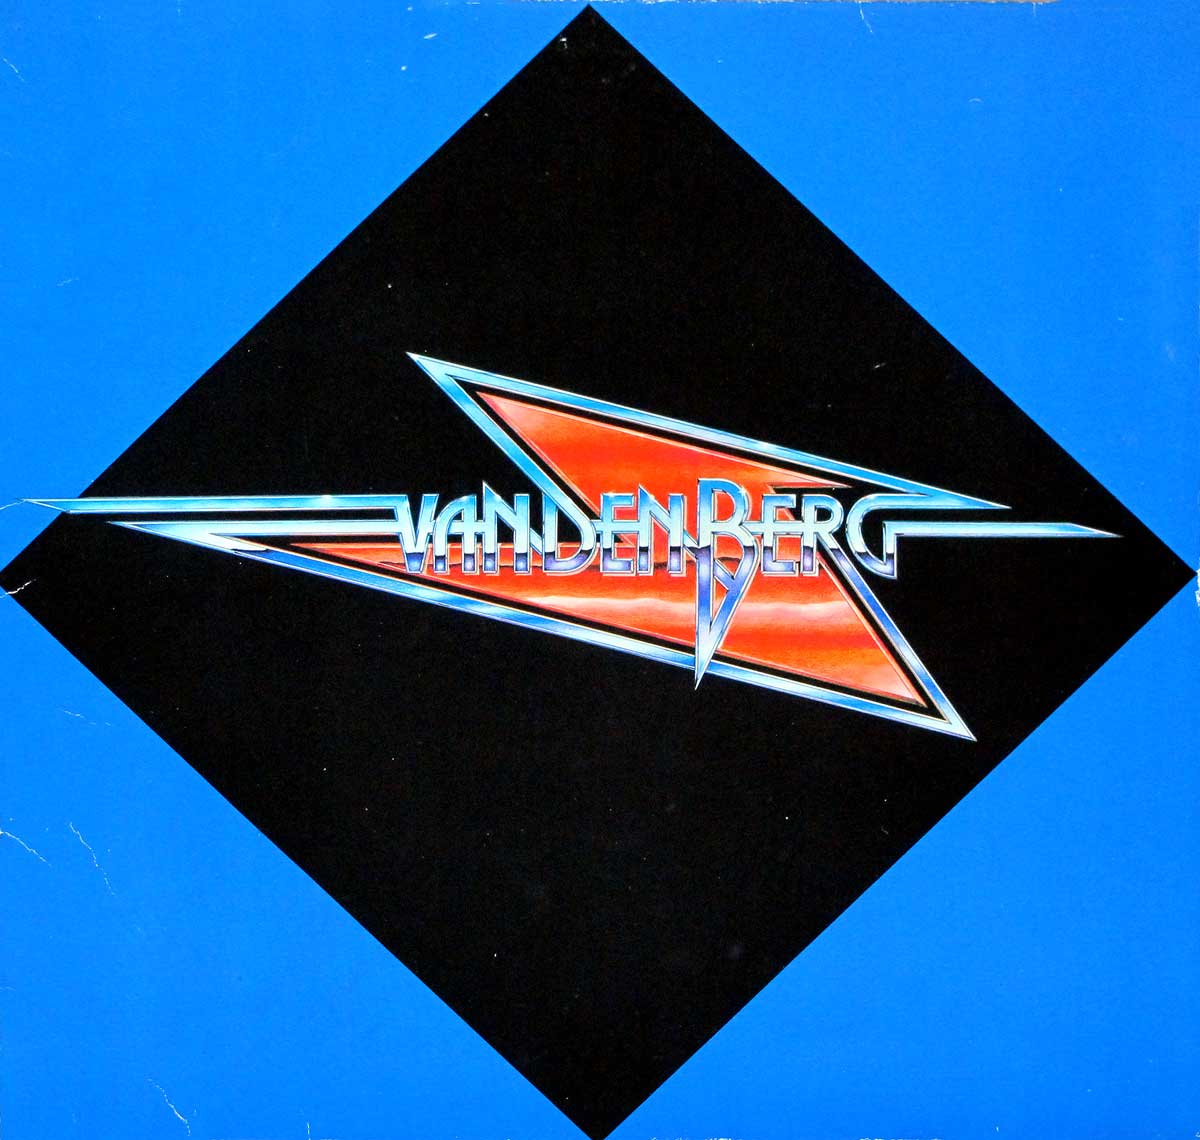 High Quality Photo of Album Front Cover  "VANDENBERG - S/T Self-Titled"